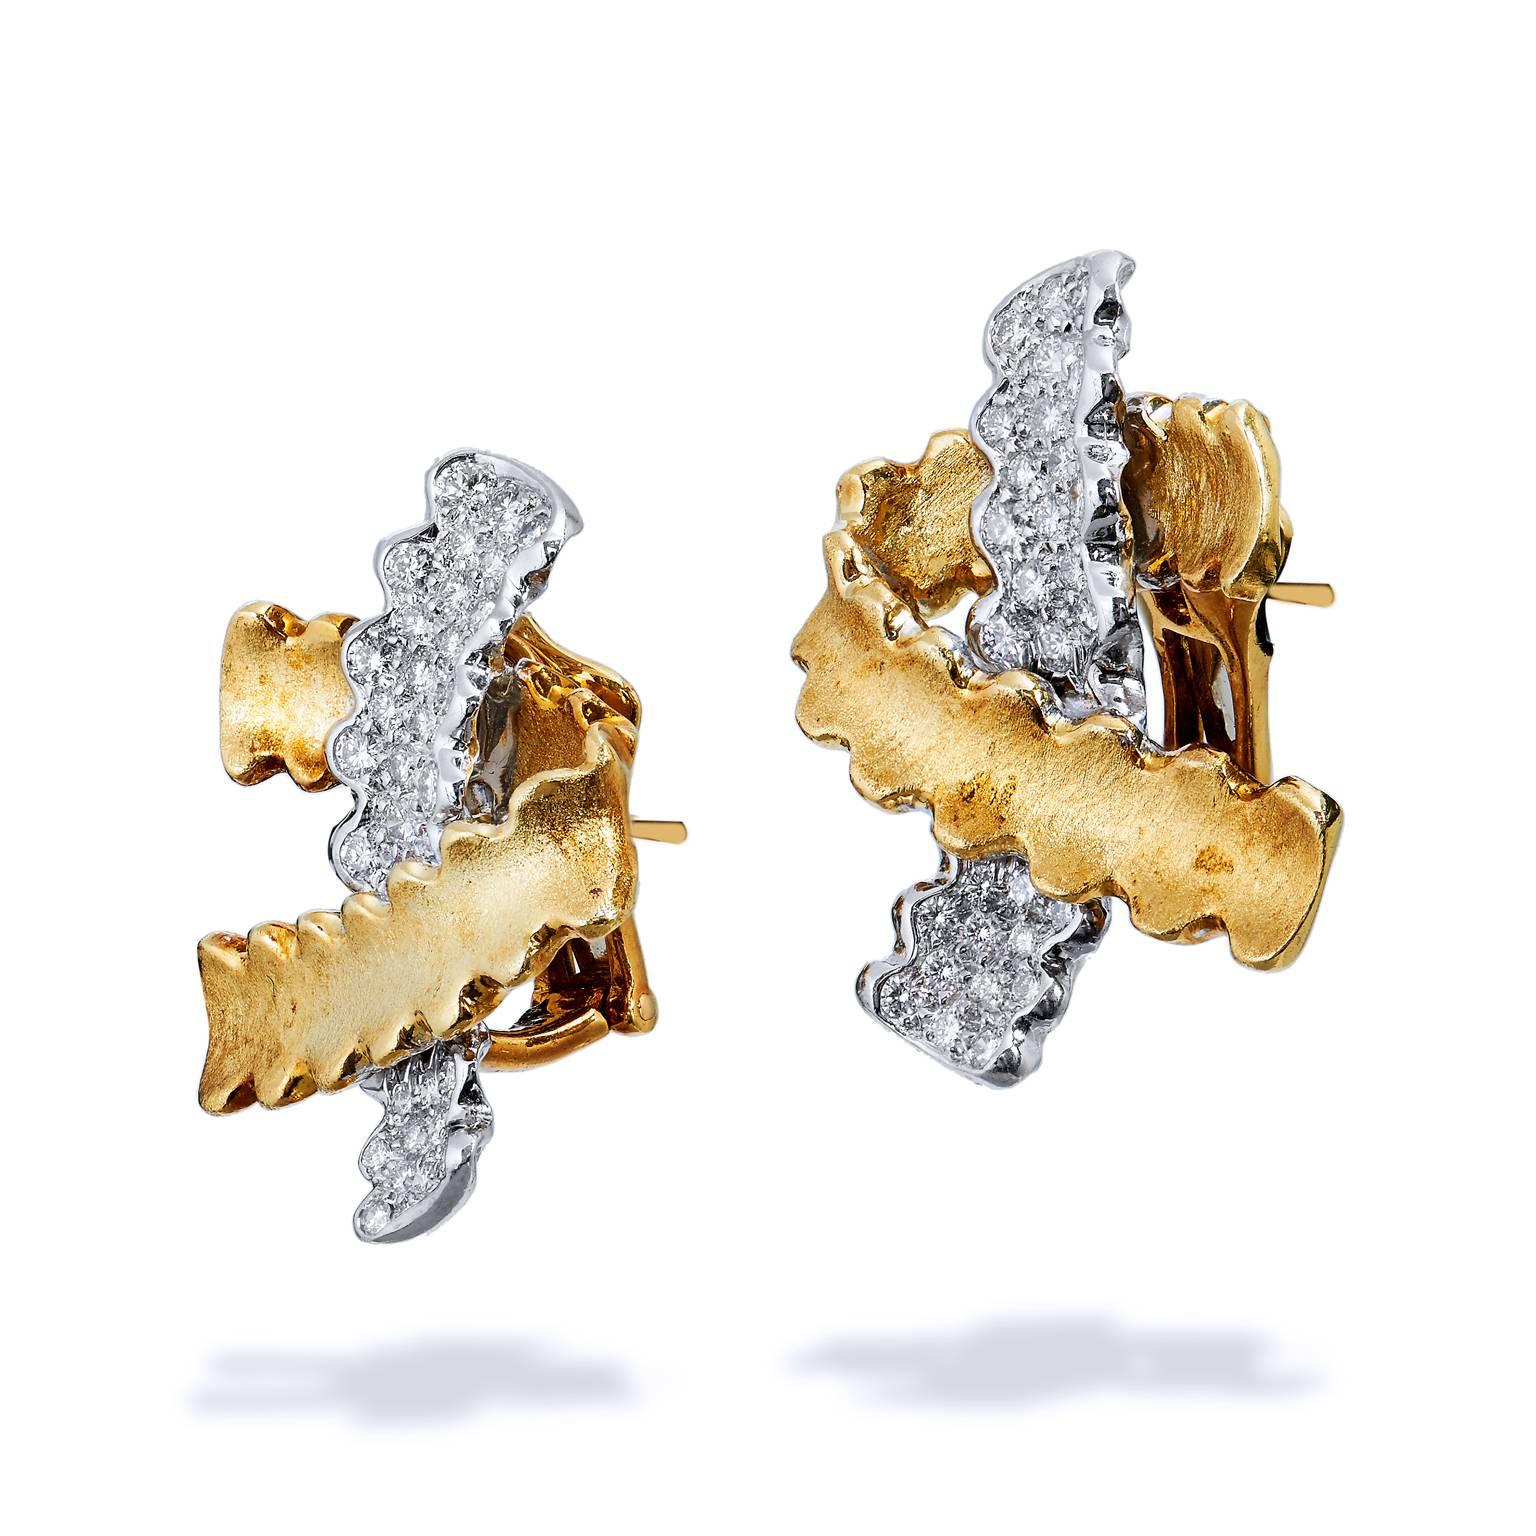 Submerge yourself in the natural realism of Nicholas Varney’s imagination with these previously loved, platinum, 18 karat gold and diamond earrings. Although static, these earrings embody a natural movement, like that of coral swaying on the sea